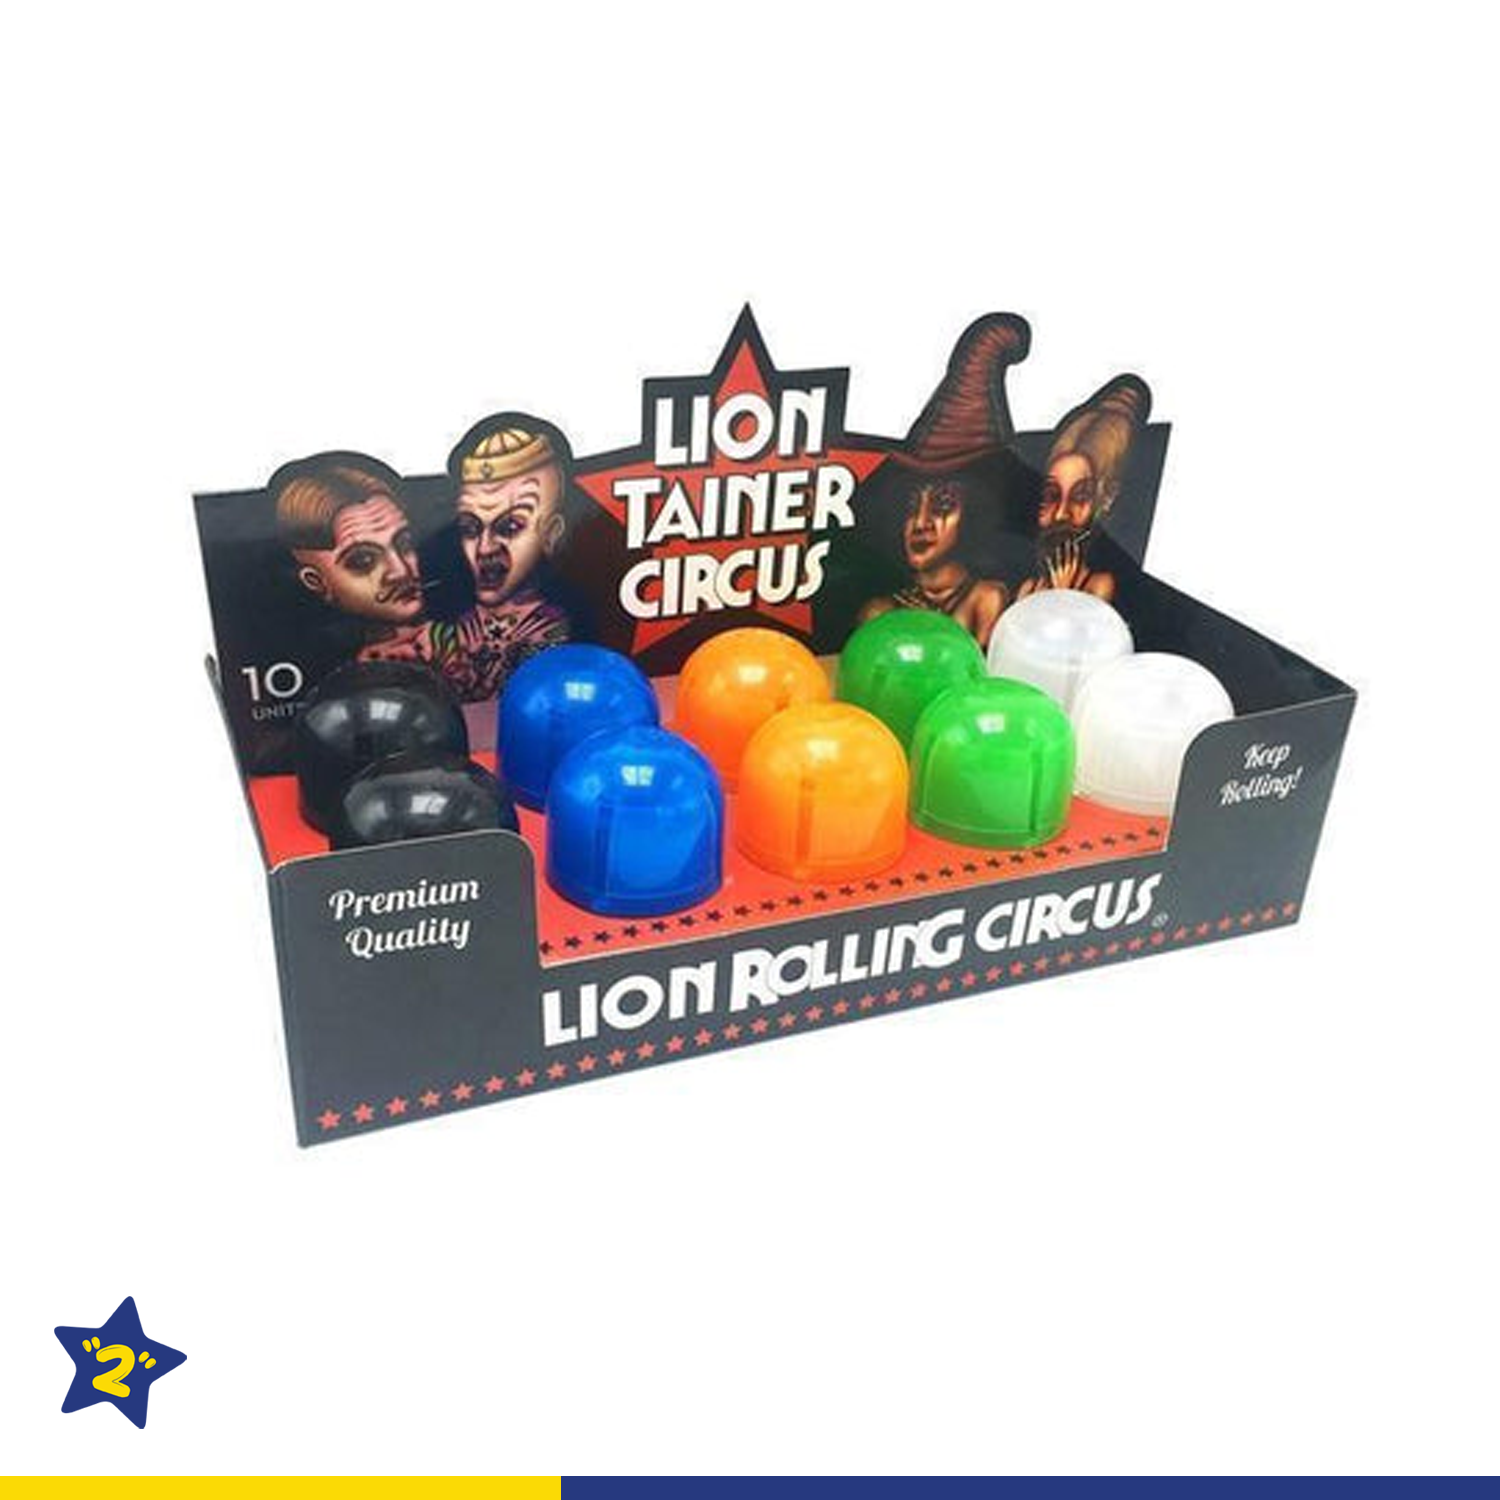 Lion Rolling Circus Container & Grinder Display